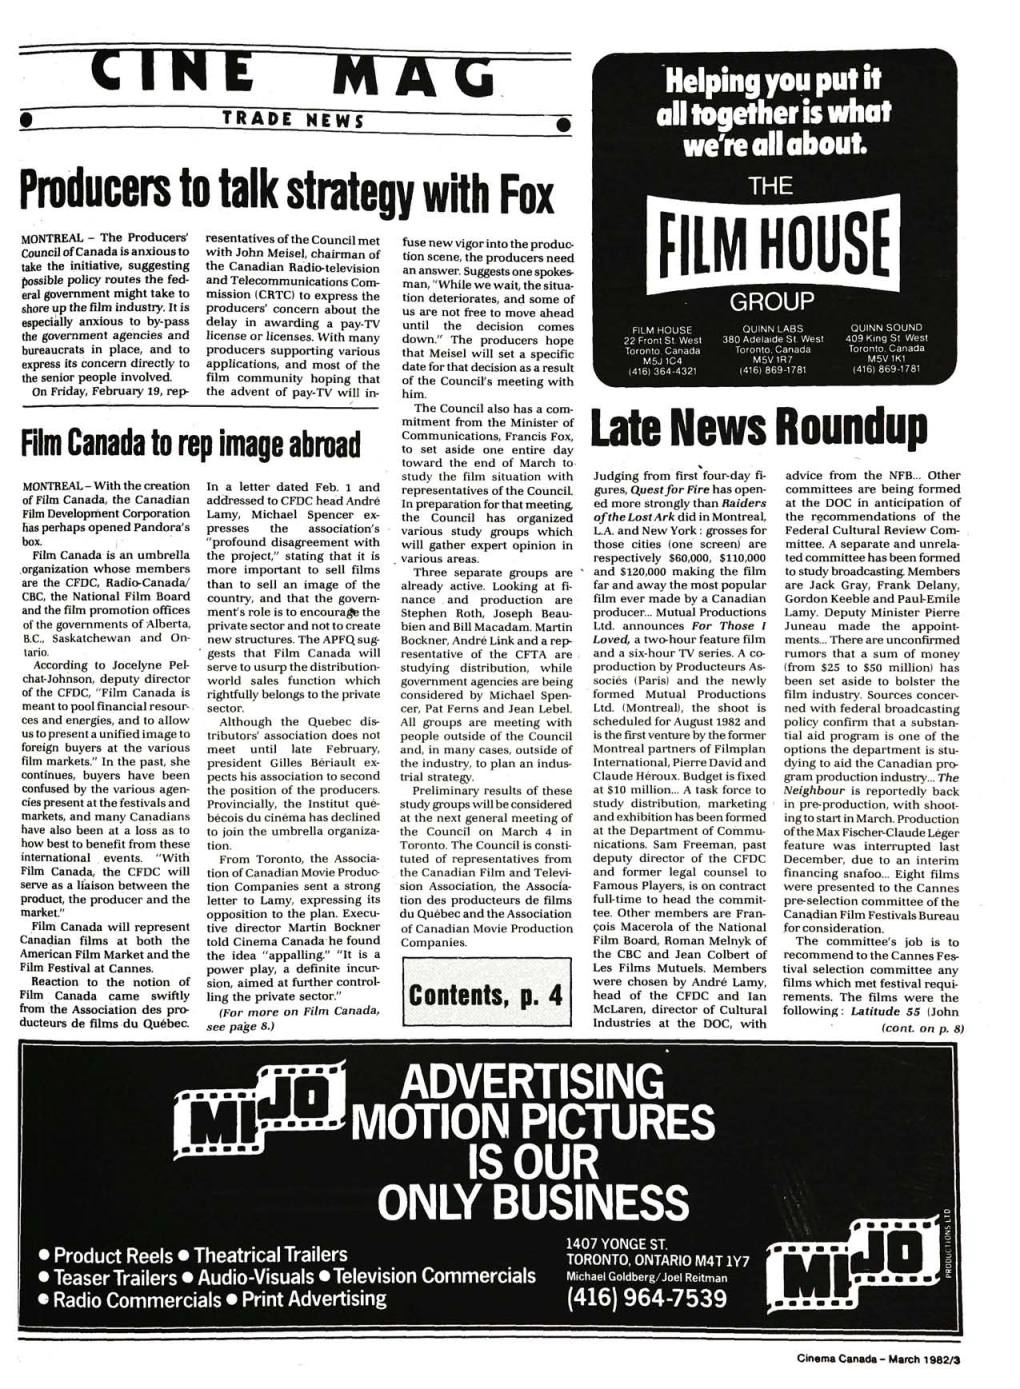 FILM HOUSE Man, "While We Wait, the Situa­ Eral Government Might Take to Mission (CRTC) to Express the Tion Deteriorates, and Some of Shore up the Film Industry